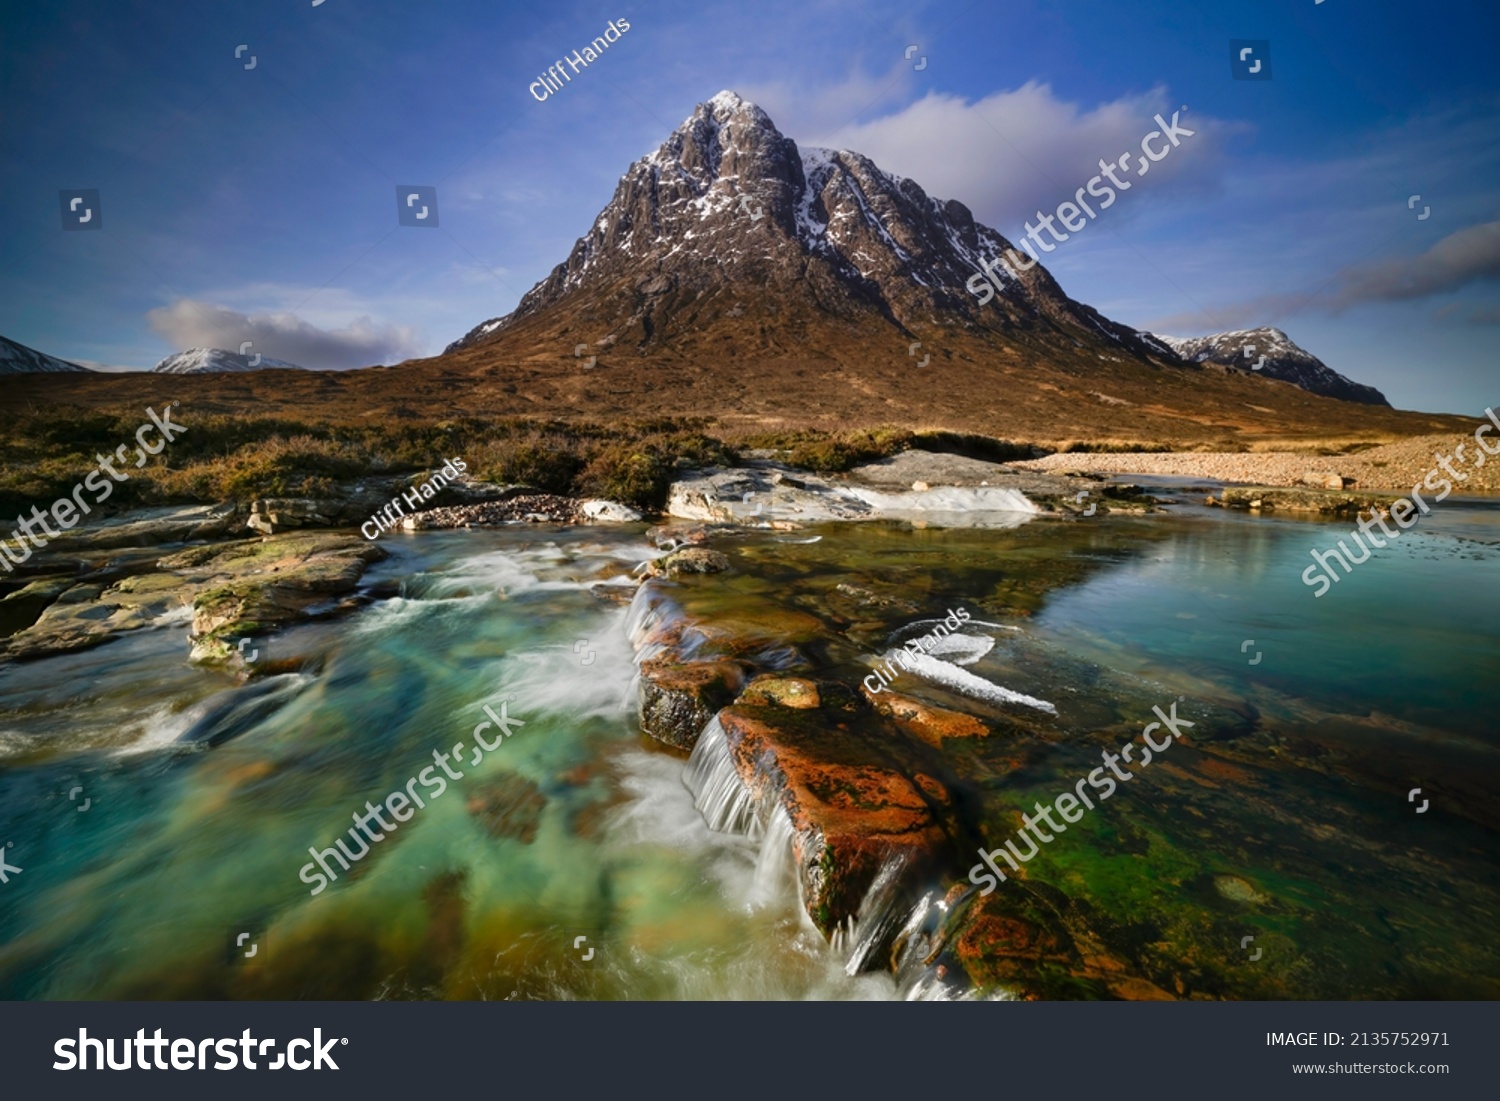 Buachaille Etive mor mountain with the river Coupall, known also as Glencoe mountain. located in the heart of Glencoe, Highlands Scotland. #2135752971